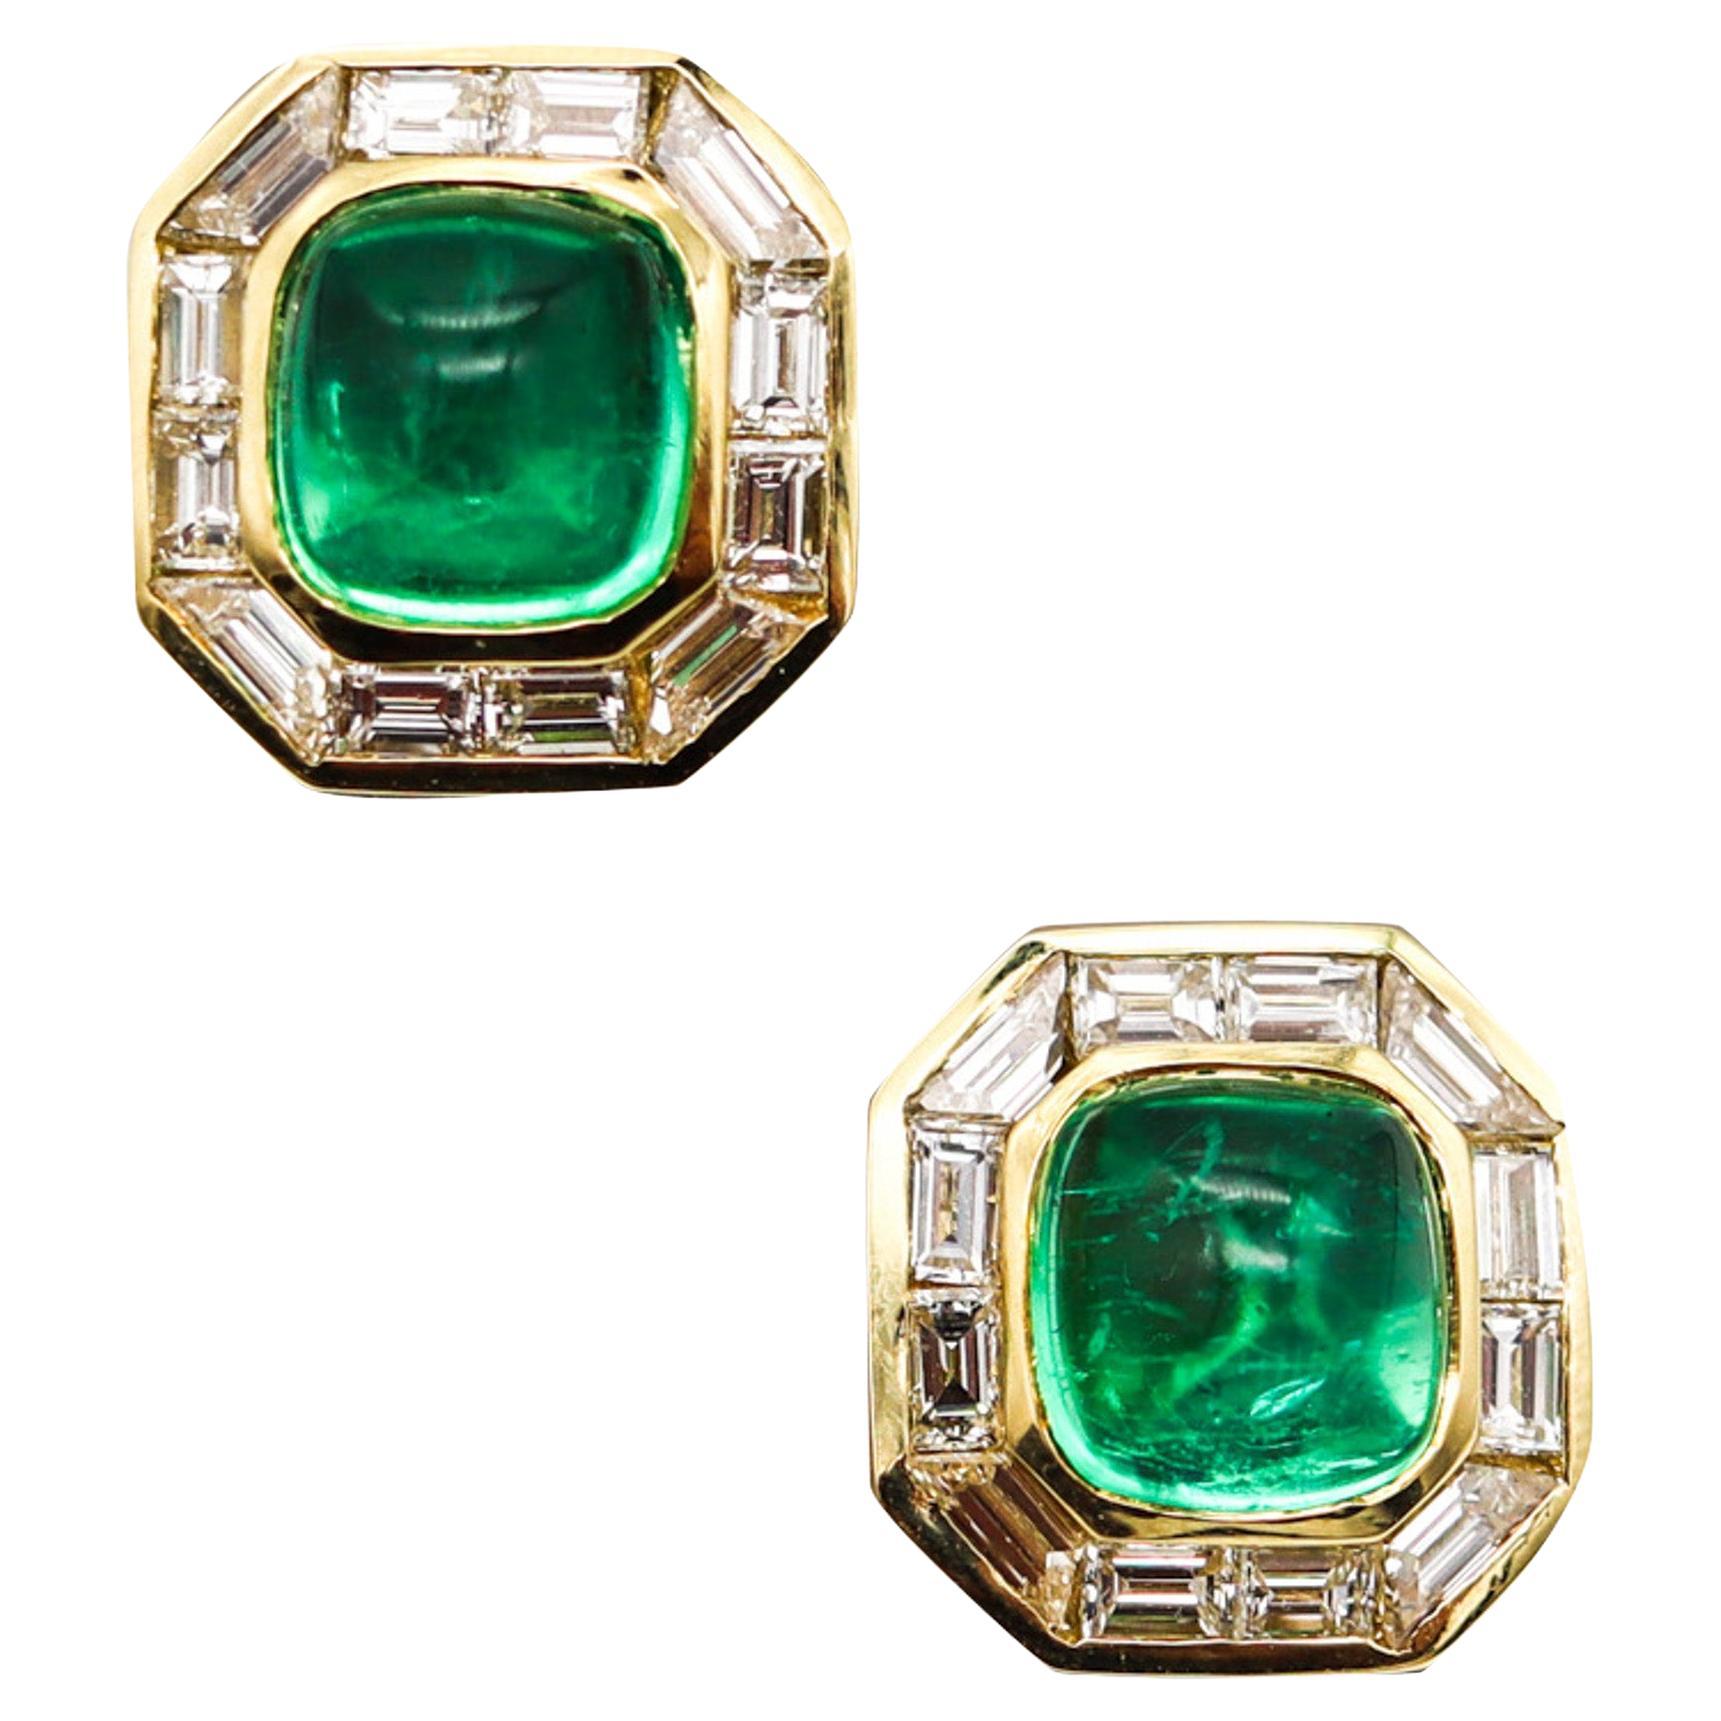 Bvlgari Clip On Earrings In 18Kt Gold With 11.72 Ctw In Diamonds And Emeralds